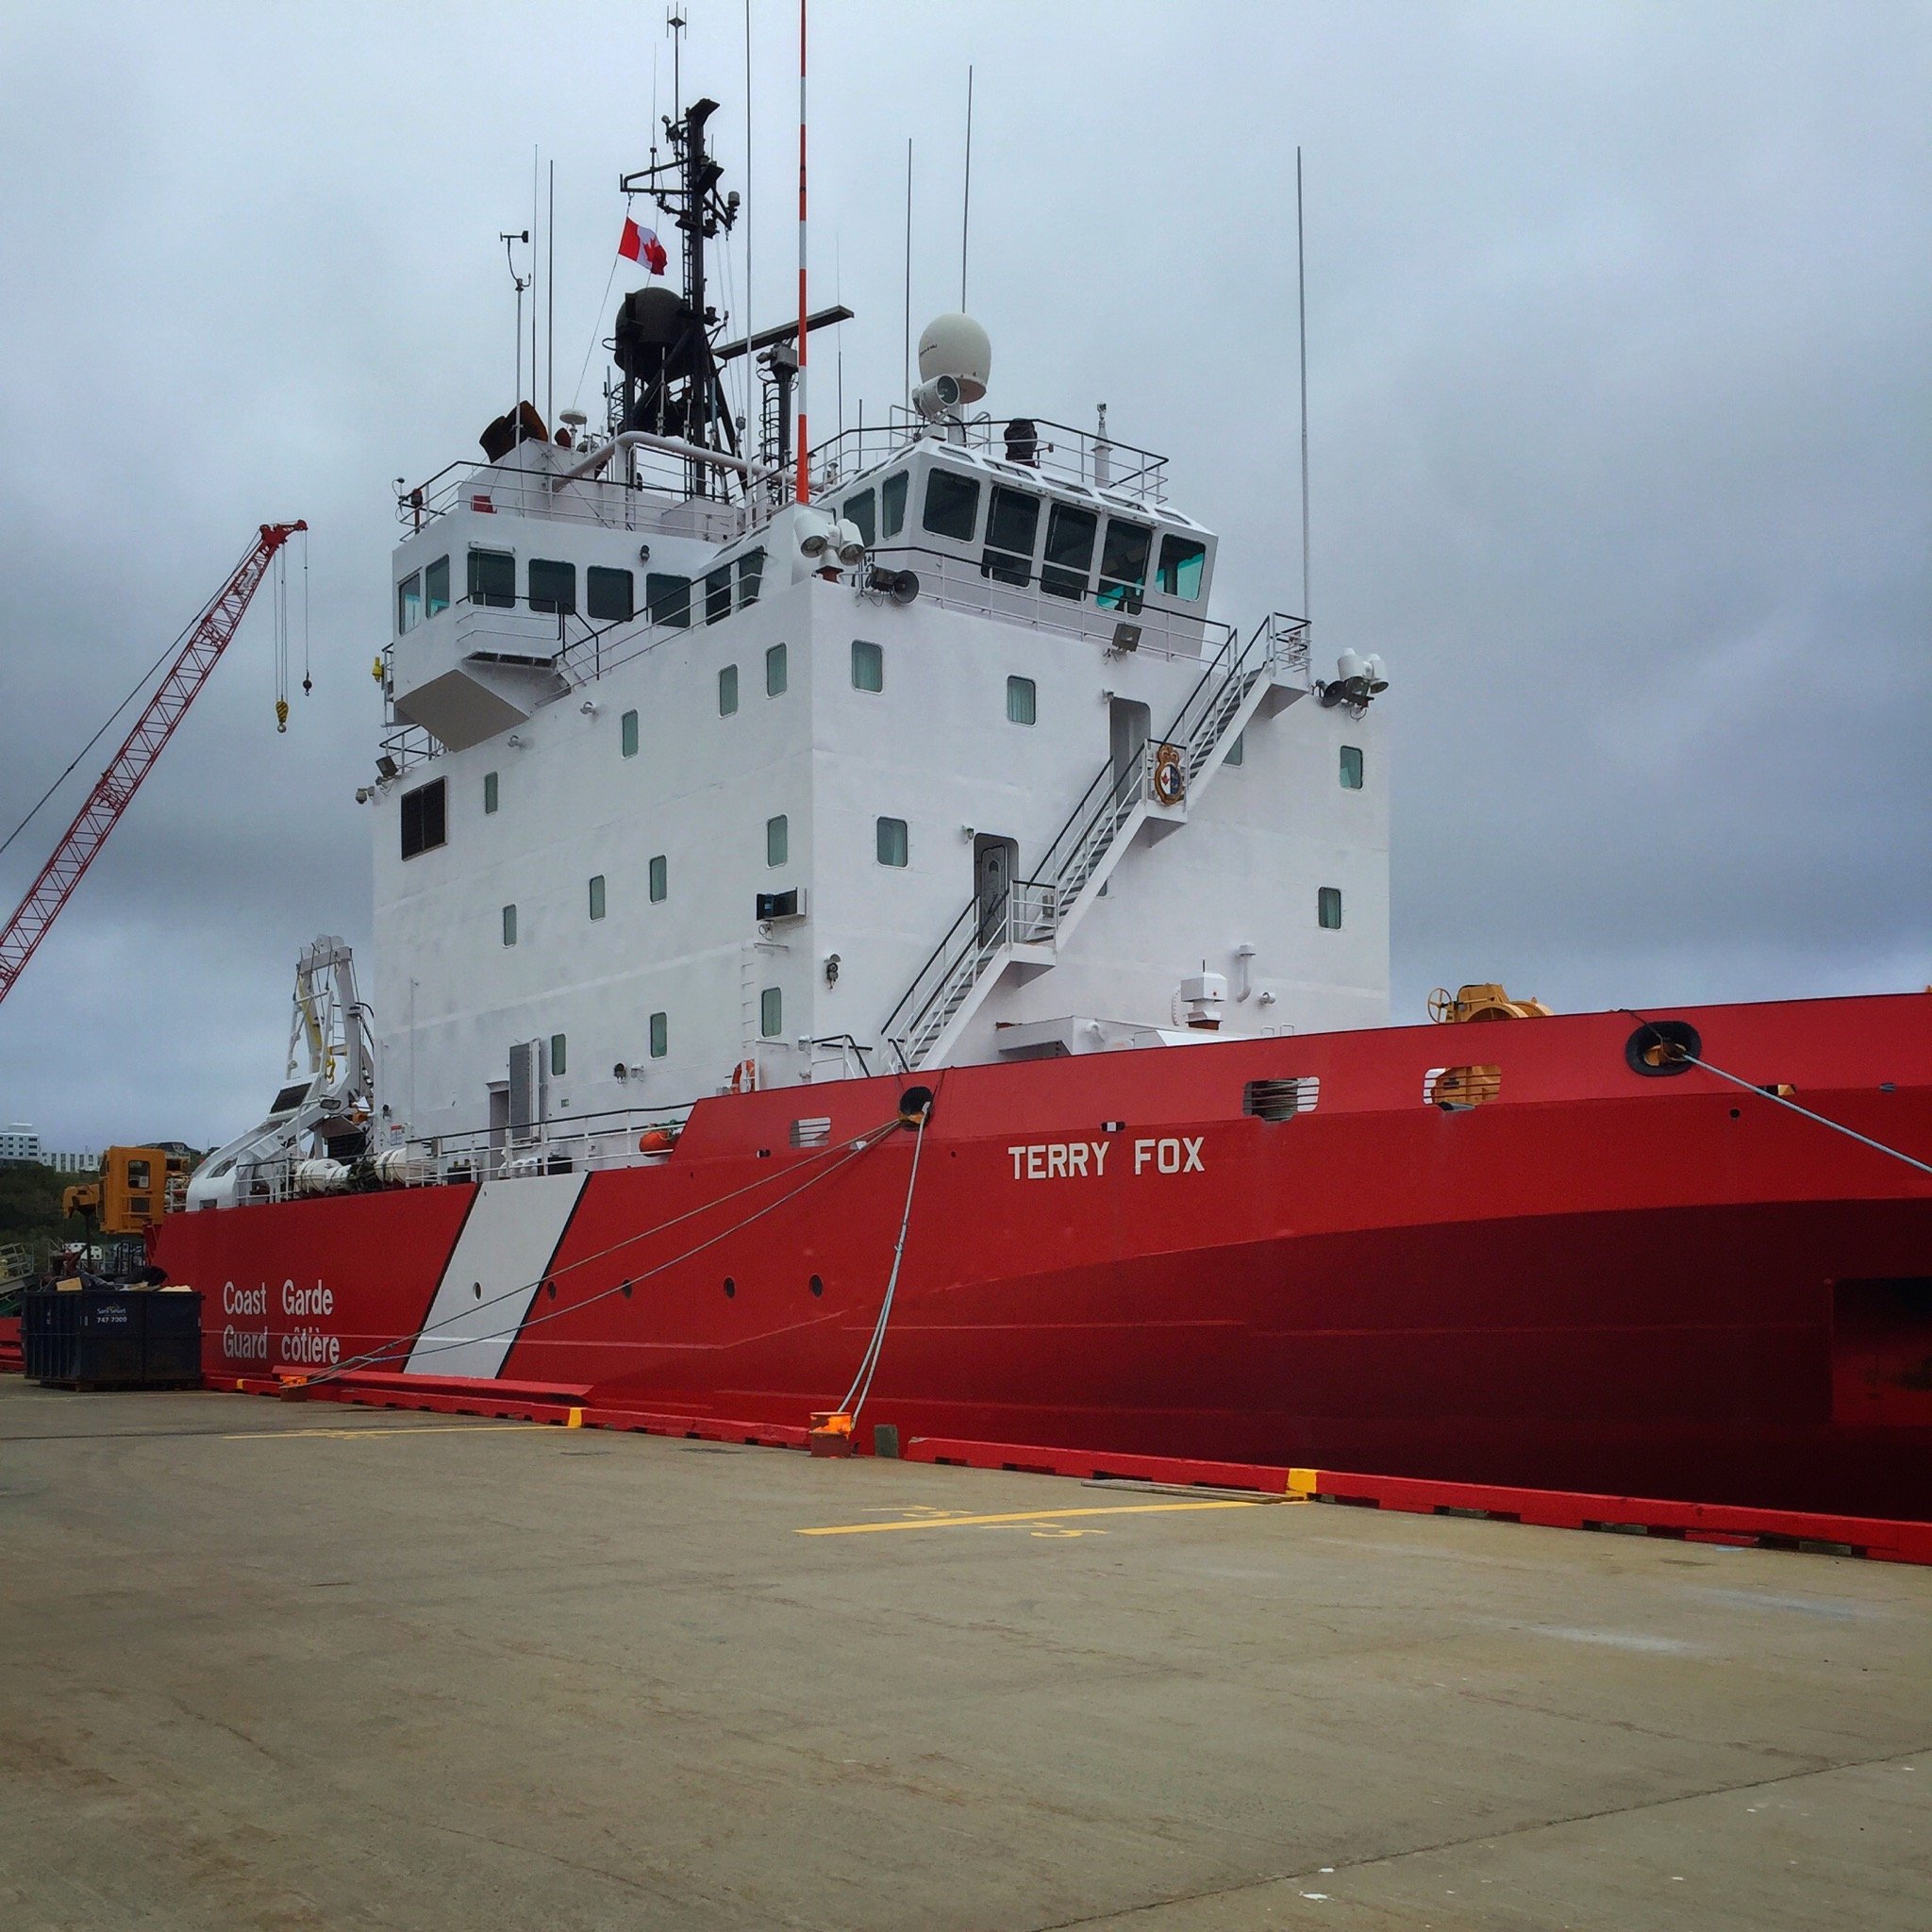 Canadian Coast Guard Ship Docked in Harbour